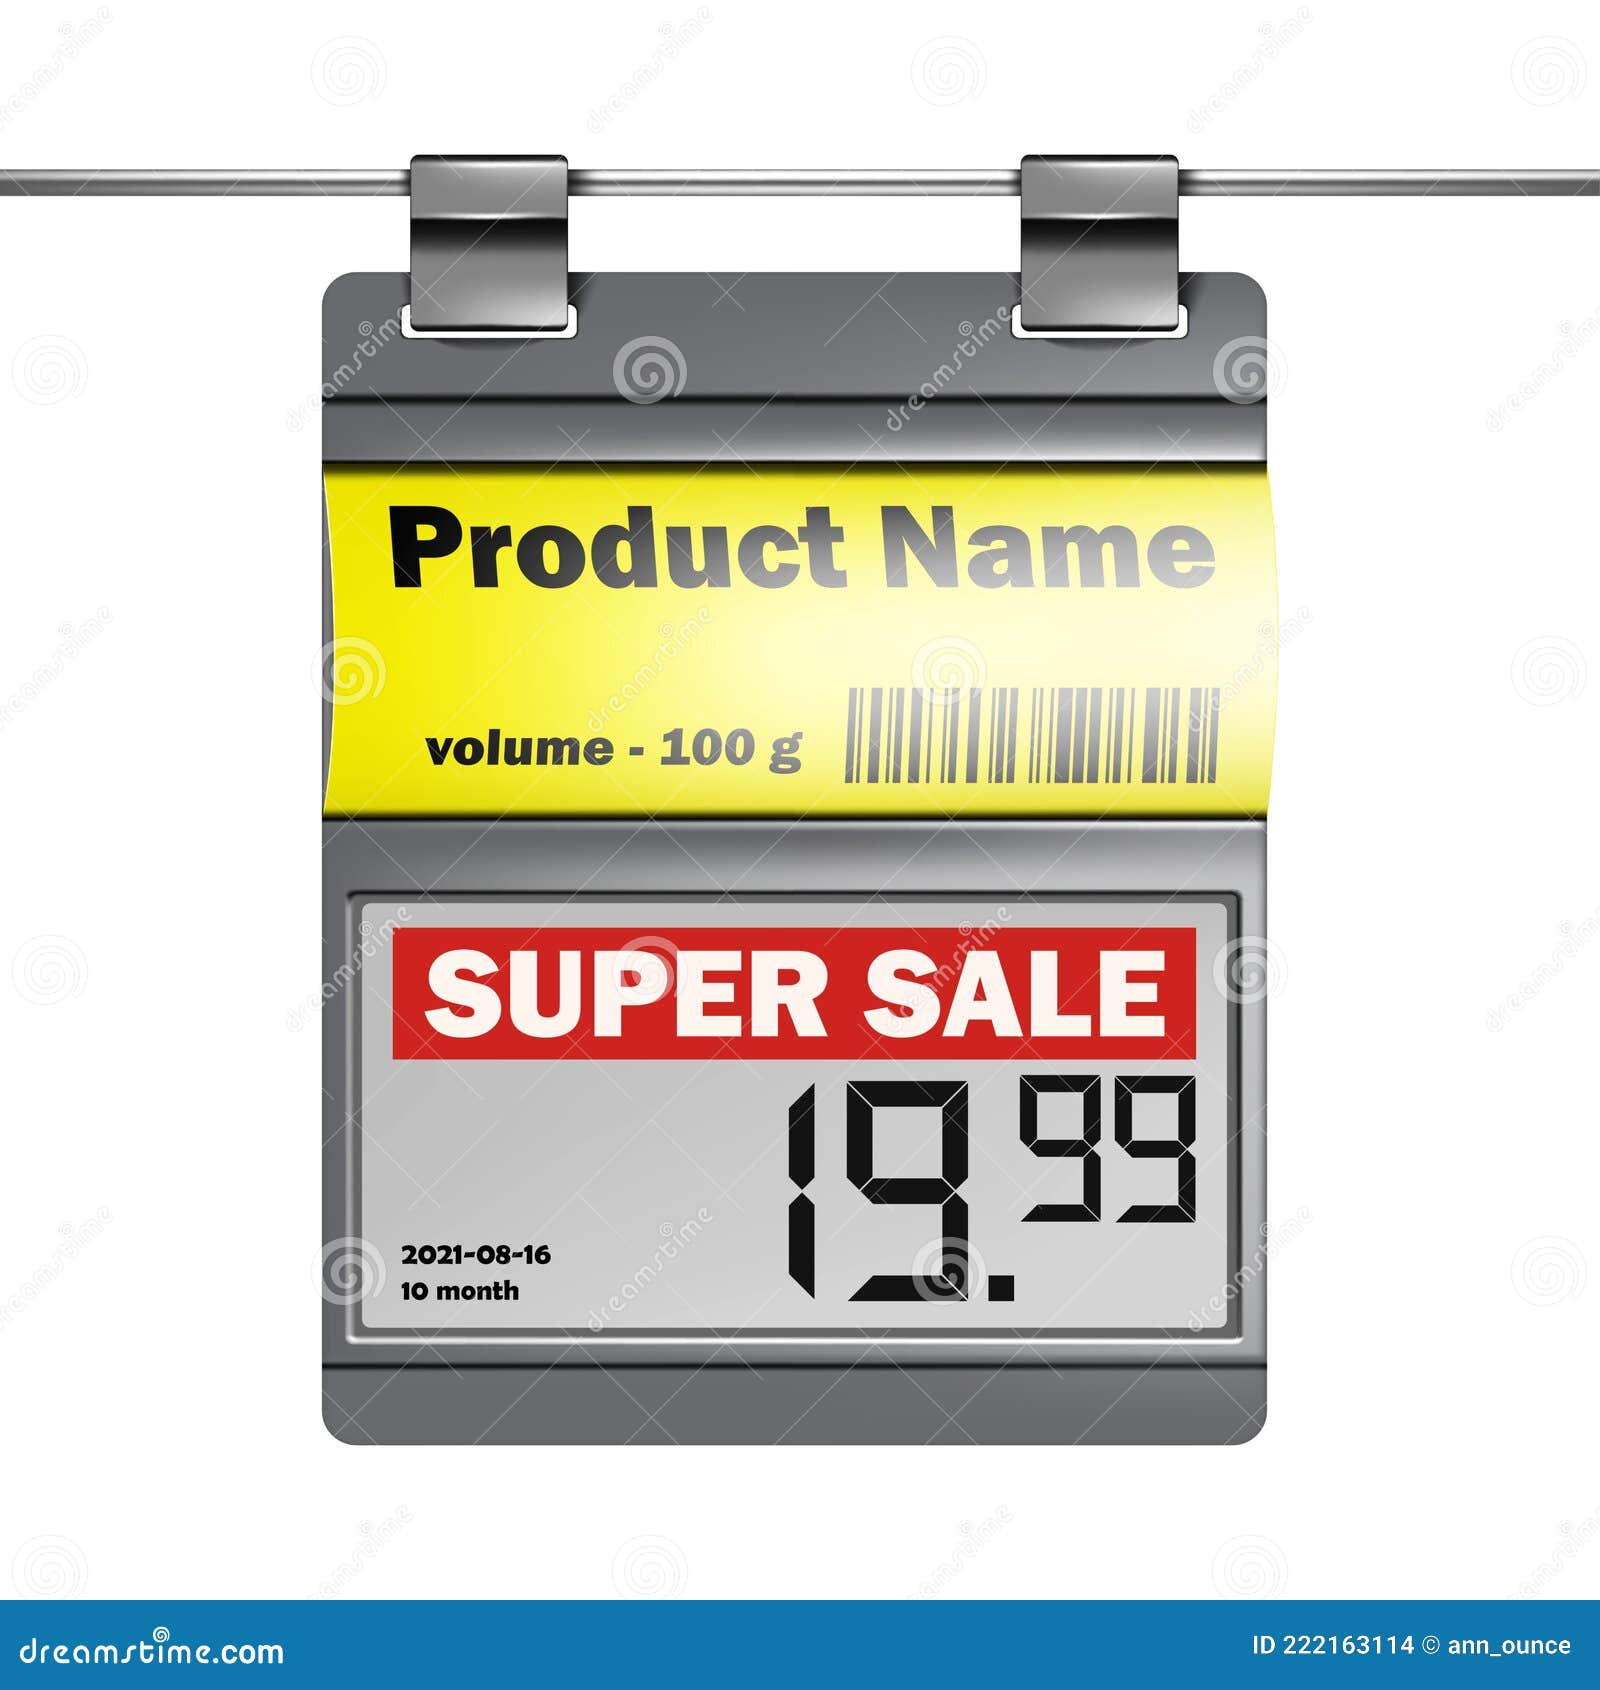 electronic-shelf-label-e-paper-display-for-supermarket-price-tags-with